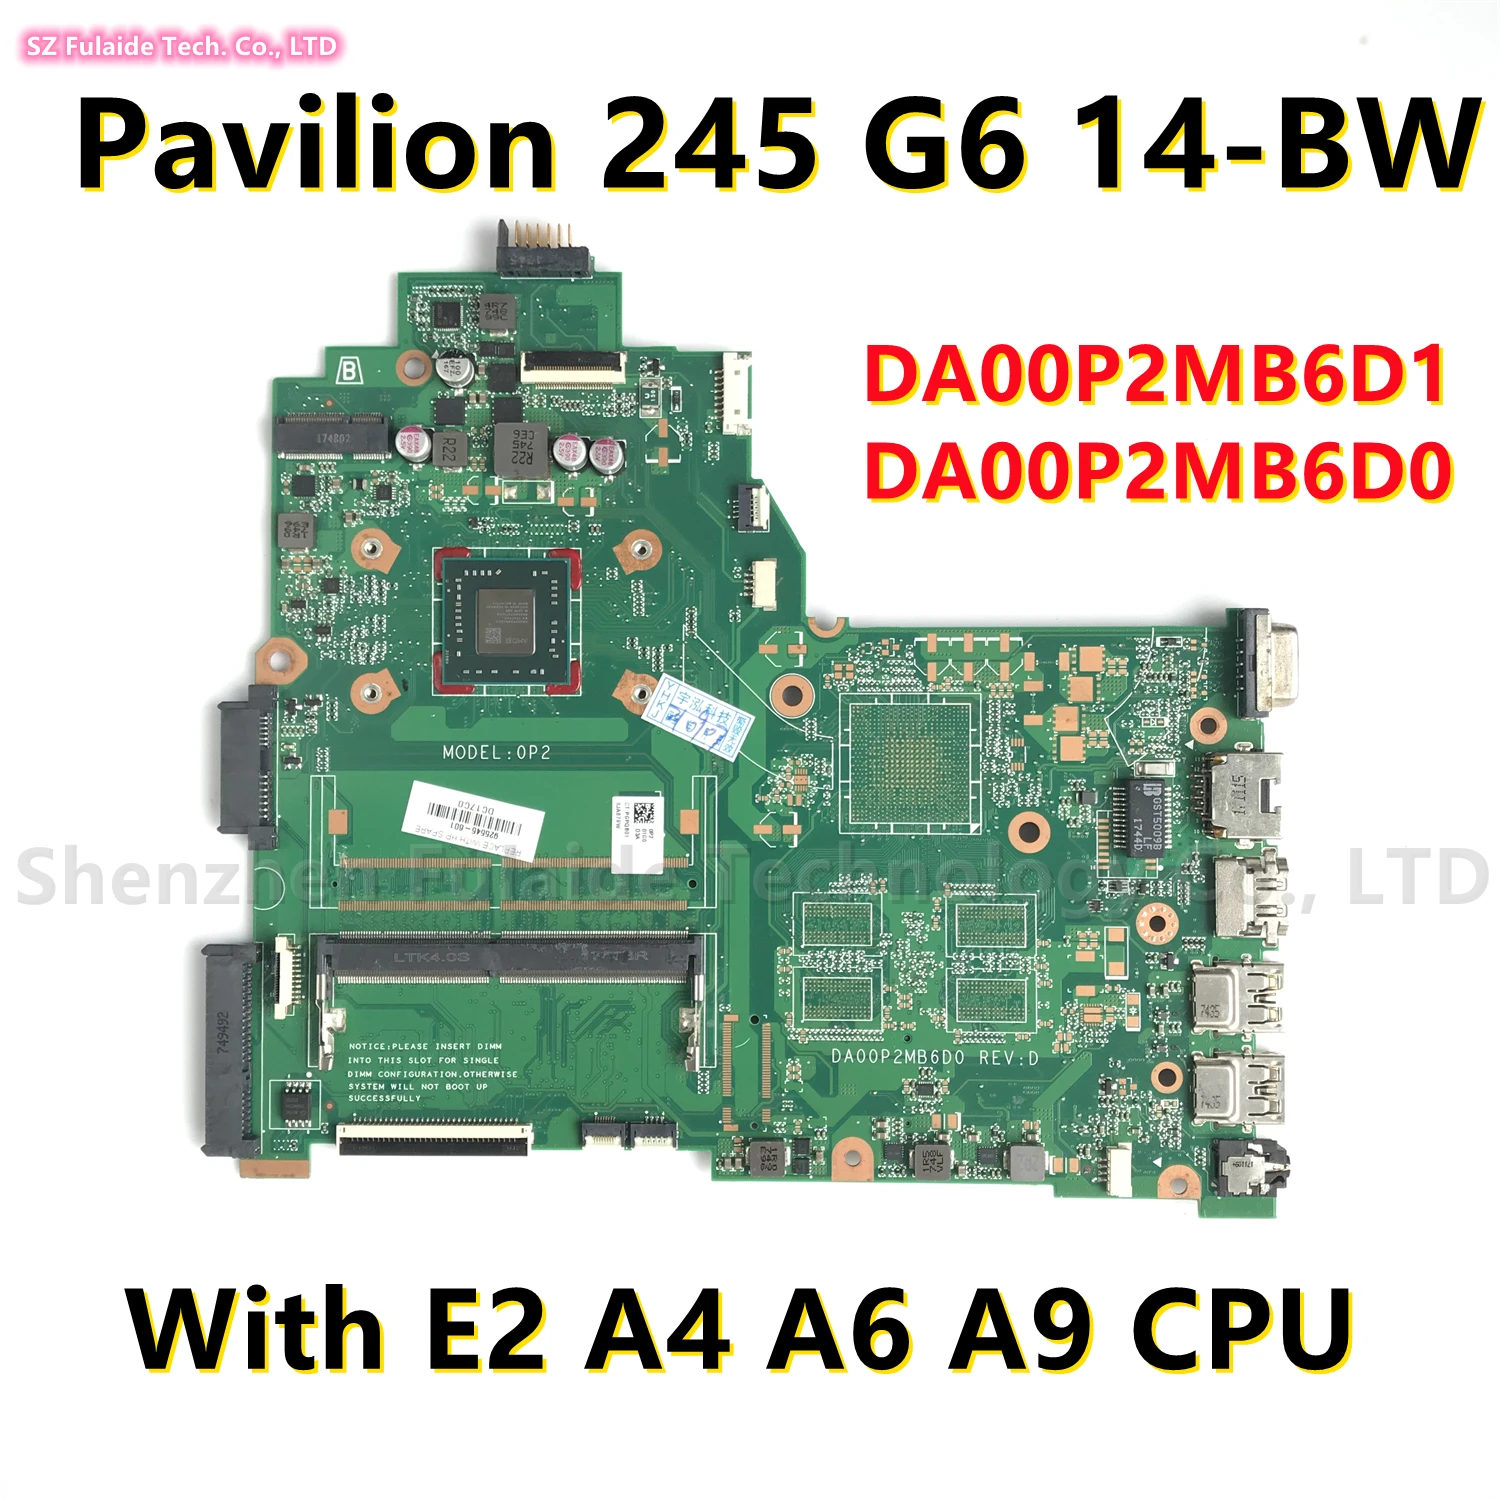 925545-601 L06646-601 For HP Pavilion 245 G6 14-BW Laptop Motherboard with E2 A4 A6 A9 CPU DA00P2MB6D1 DA00P2MB6D0 100%Tested